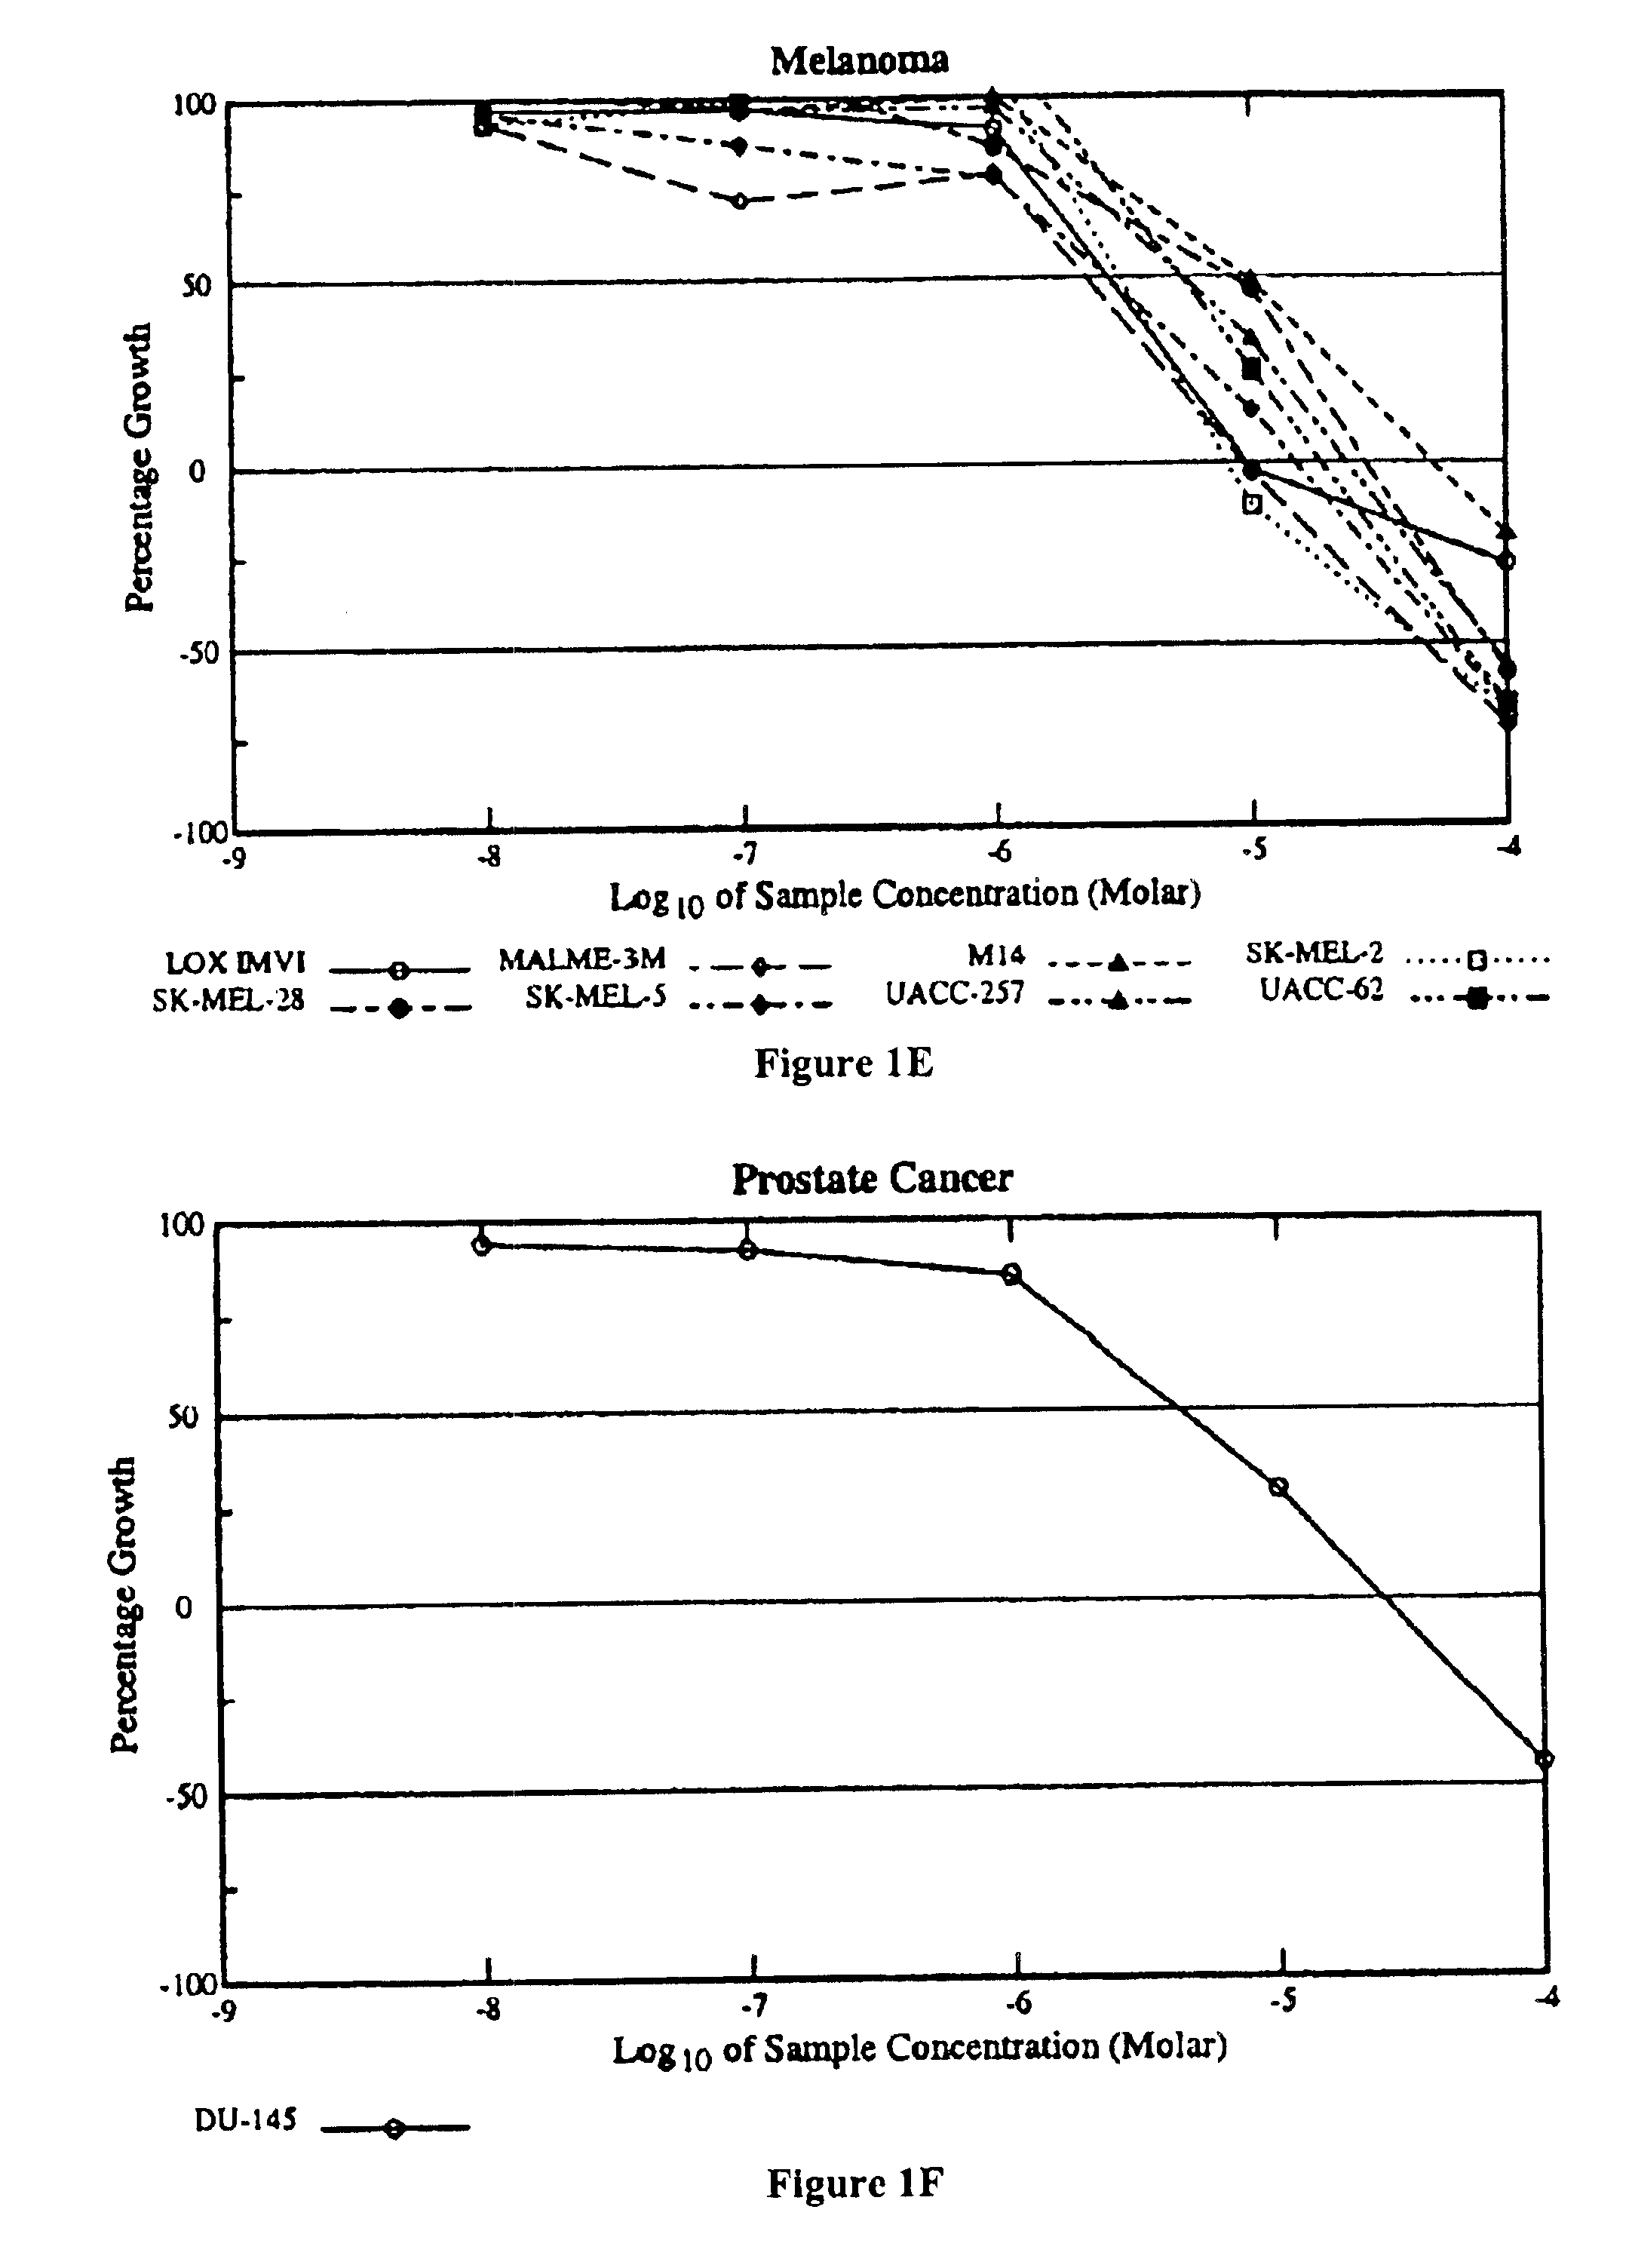 Mixed steroidal 1,2,4,5-tetraoxane compounds and methods of making and using thereof